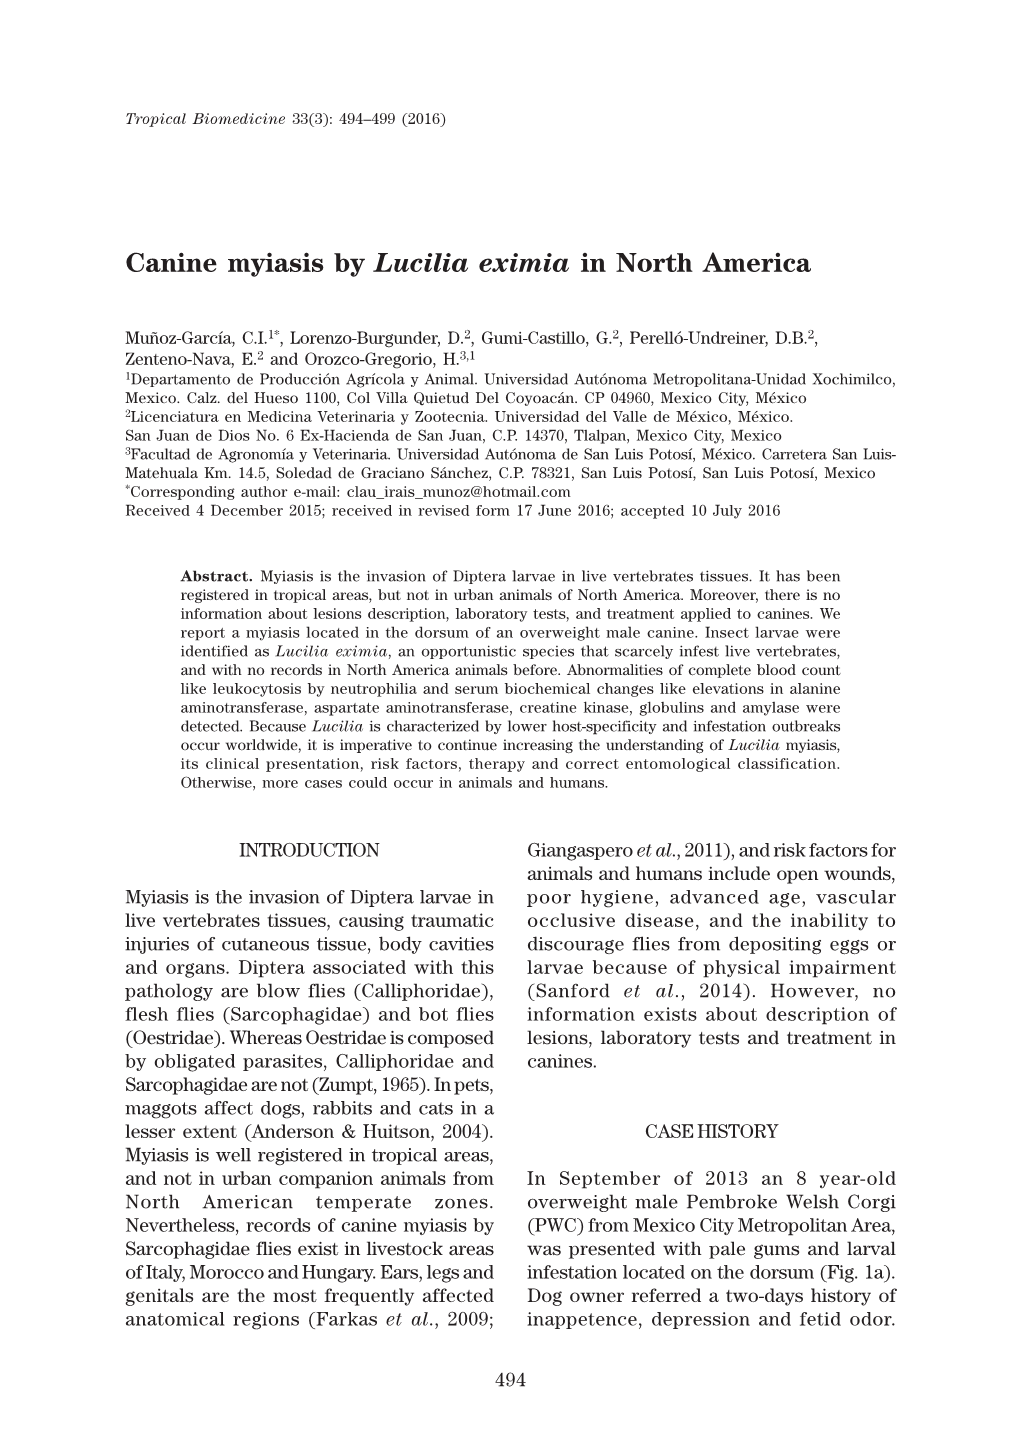 Canine Myiasis by Lucilia Eximia in North America